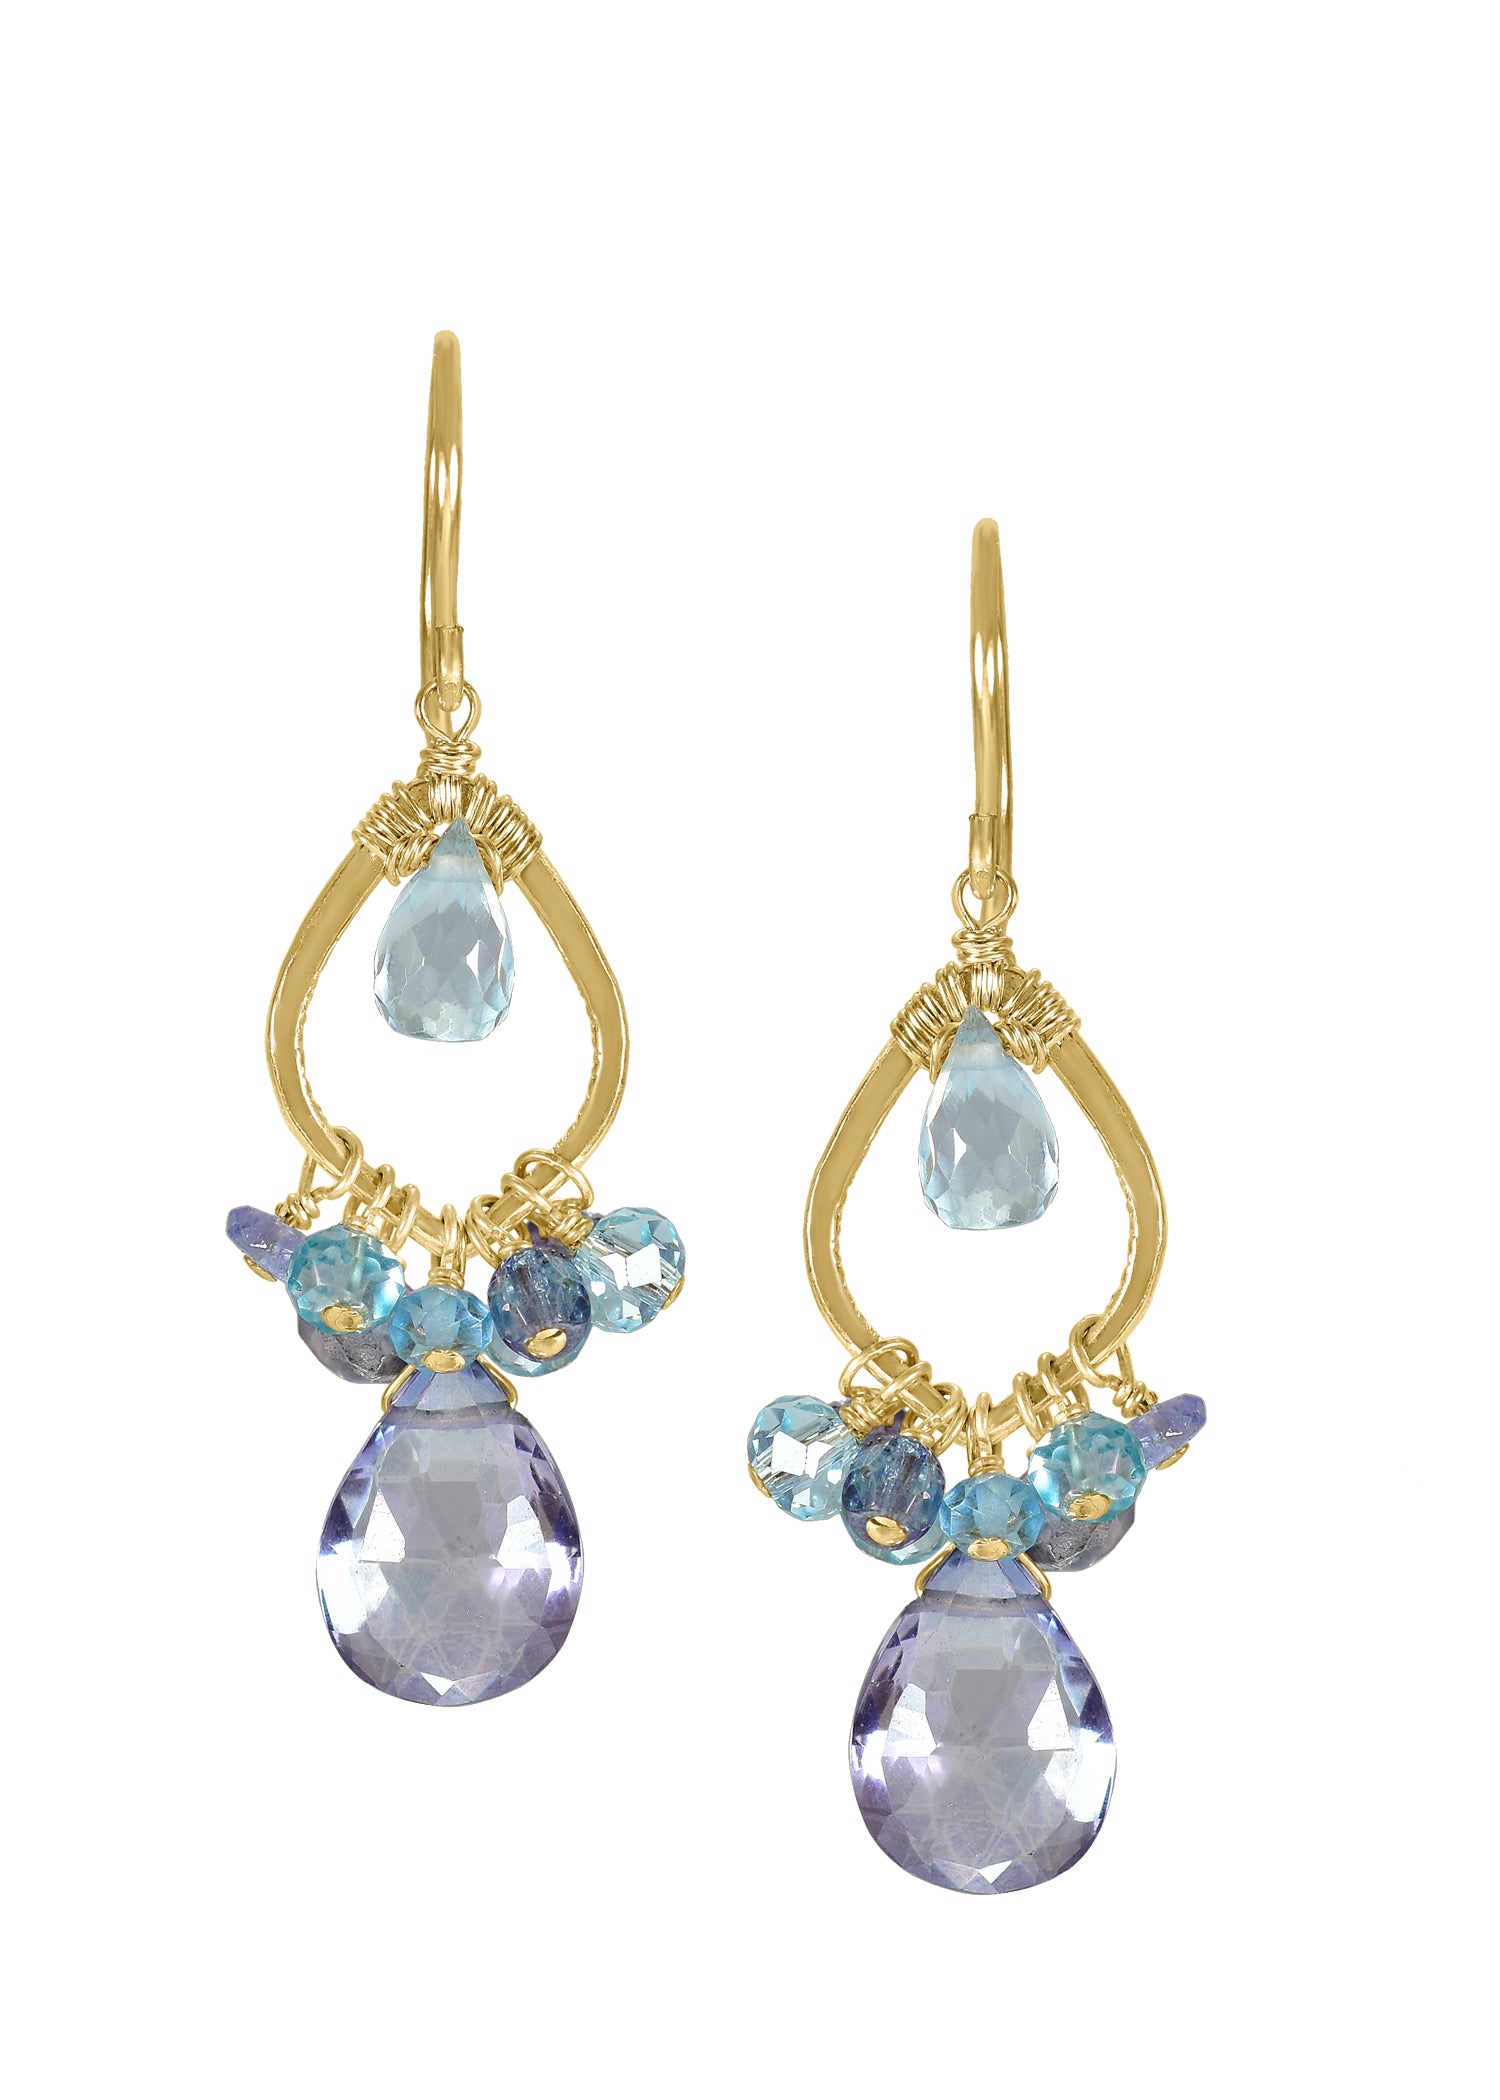 Aquamarine Blue quartz Blue sapphire 14k gold fill Crystal Earrings measure 1-1/2" in length (including the ear wires) and 7/16" in width at the widest point Handmade in our Los Angeles studio